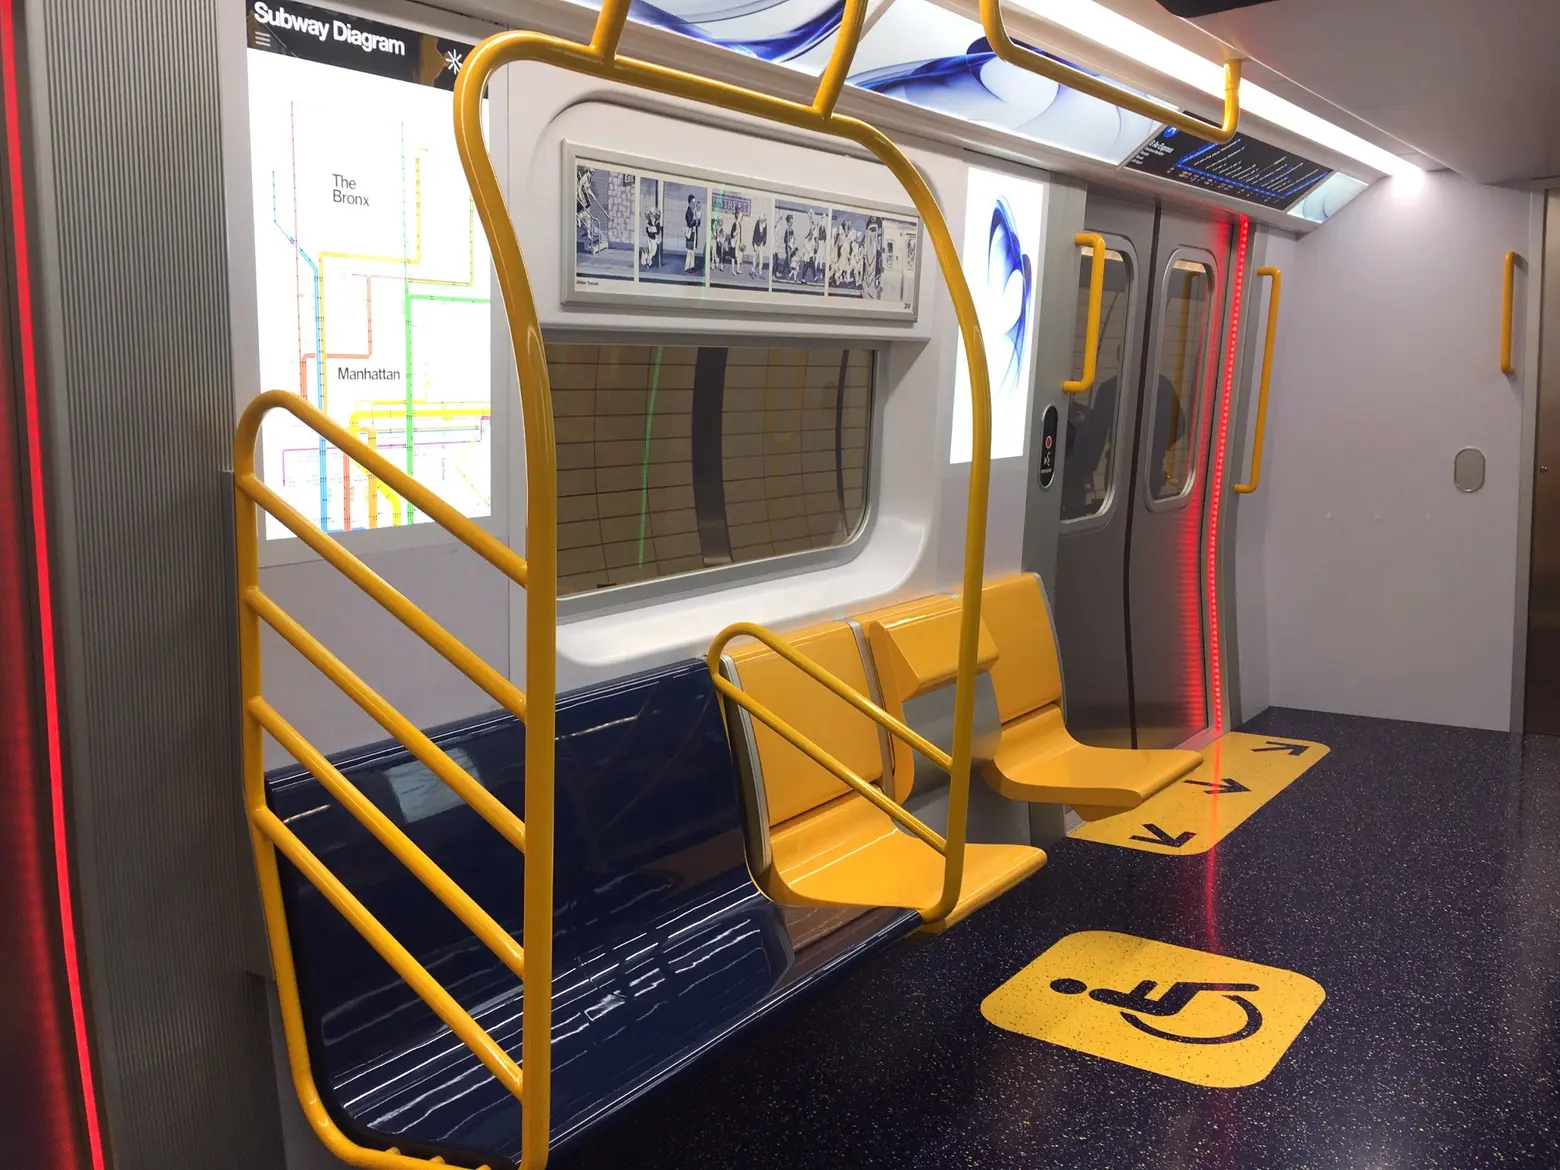 See inside the MTA’s proposed open gangway subway cars